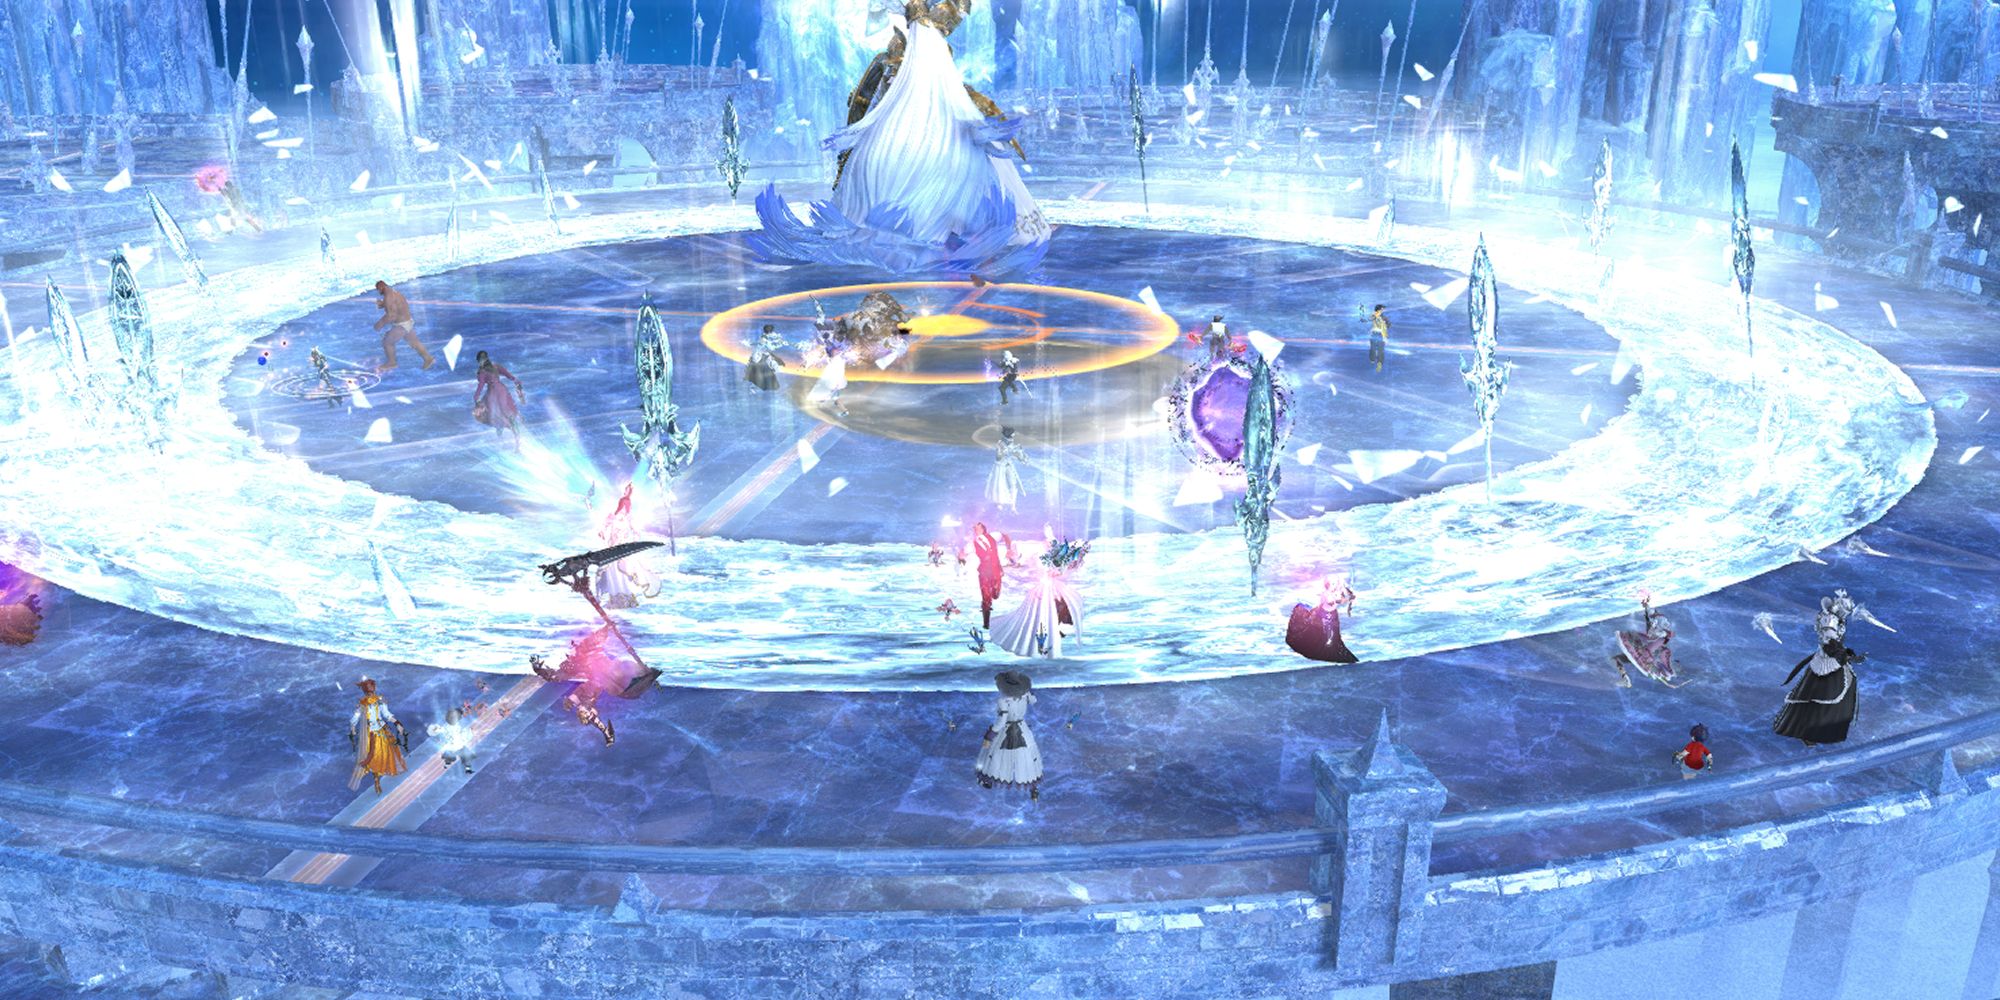 An image depicting Halone, a boss from Final Fantasy 14's raid Euphrosyne, using Wrath of Alone. Halone is summoning an icy blast while a frozen ring closes in on her position.